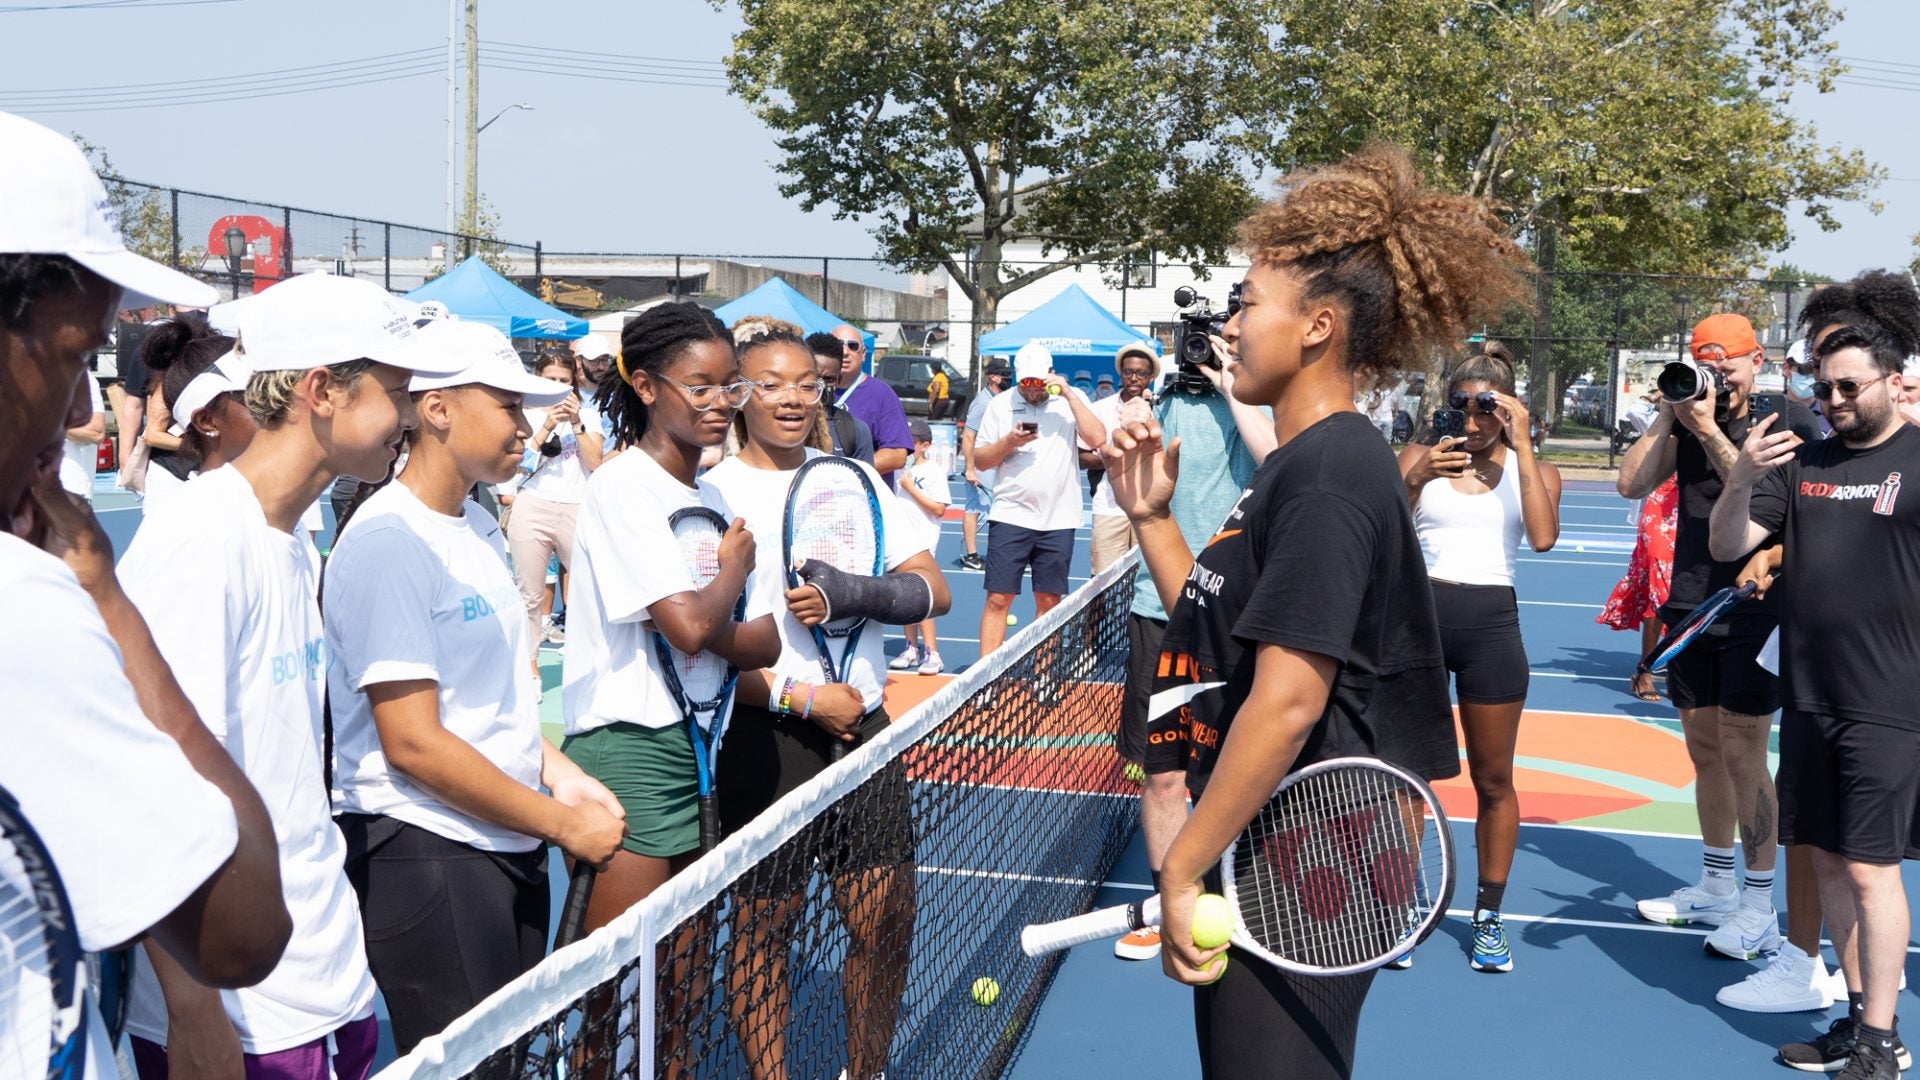 Naomi Osaka Returns To Childhood Courts To Play With The Next Generation Of Tennis Stars